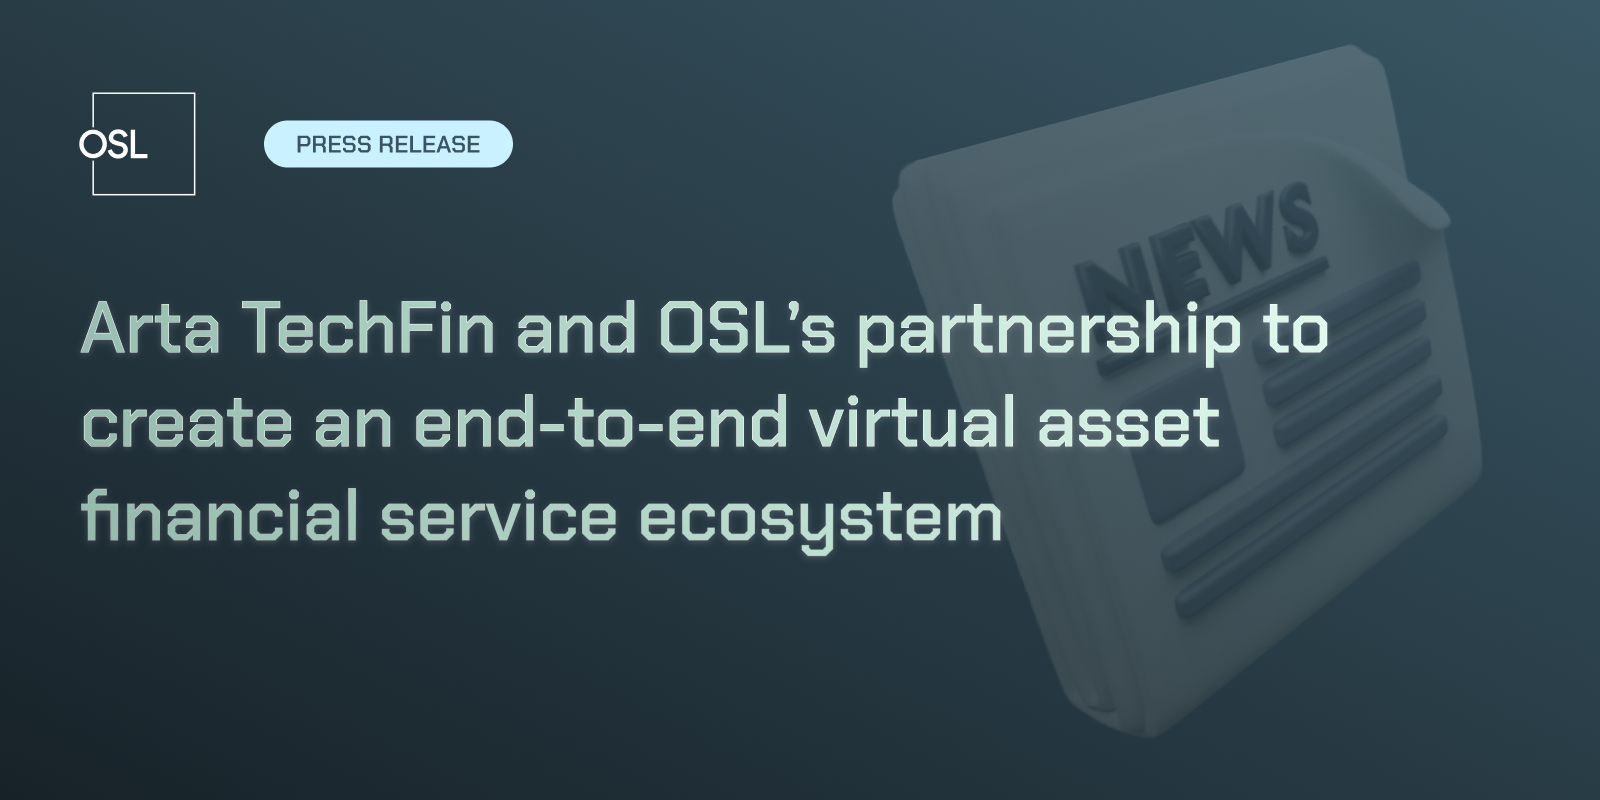 Arta TechFin and OSL’s partnership to create an end-to-end virtual asset financial service ecosystem